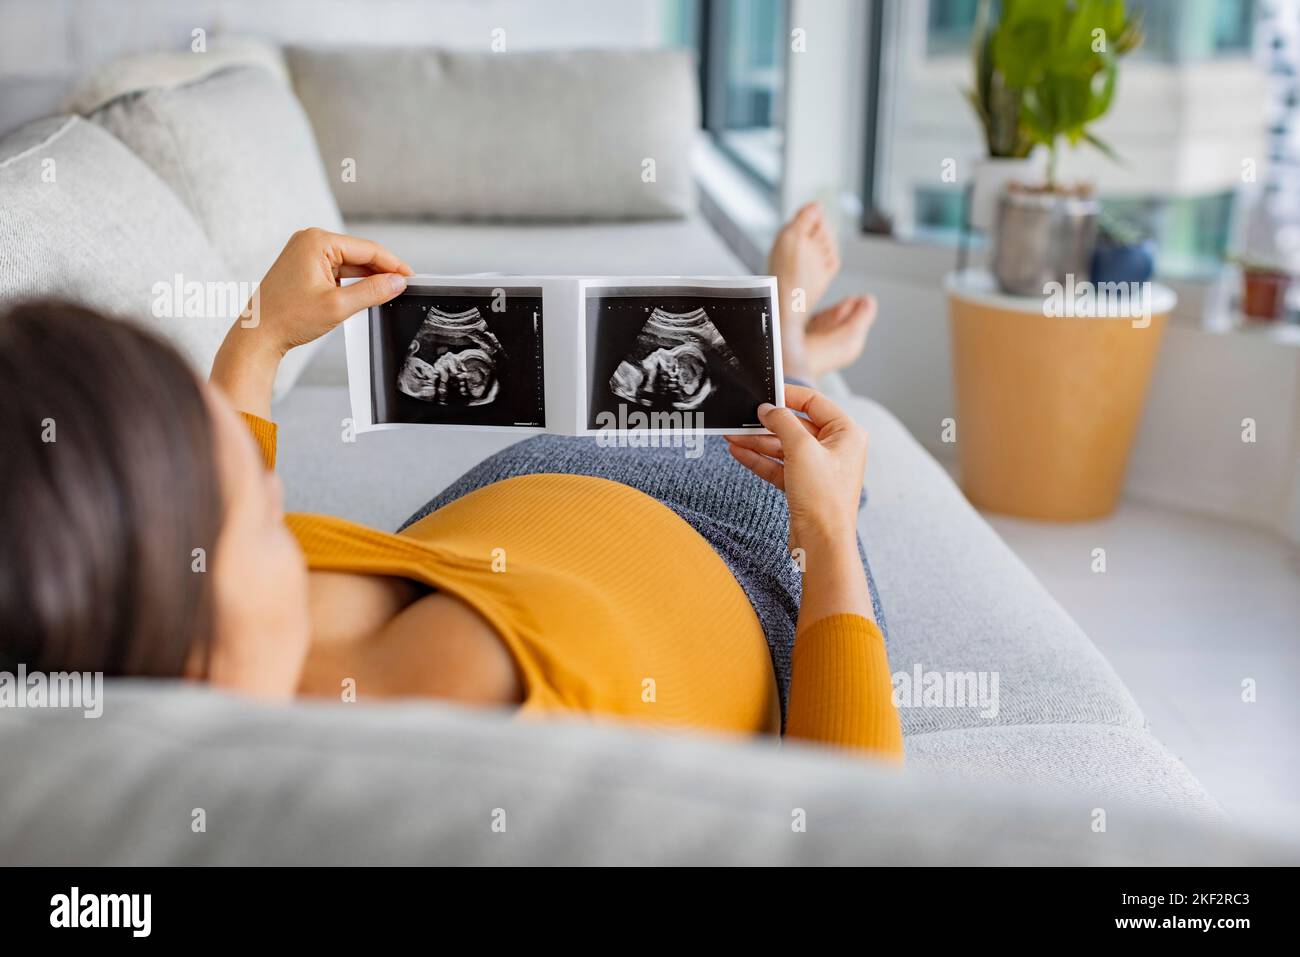 Ultrasound showing fetus. Pregnancy concept with pregnant woman looking at first photo of her baby, happily expecting the birth of her 1st child Stock Photo